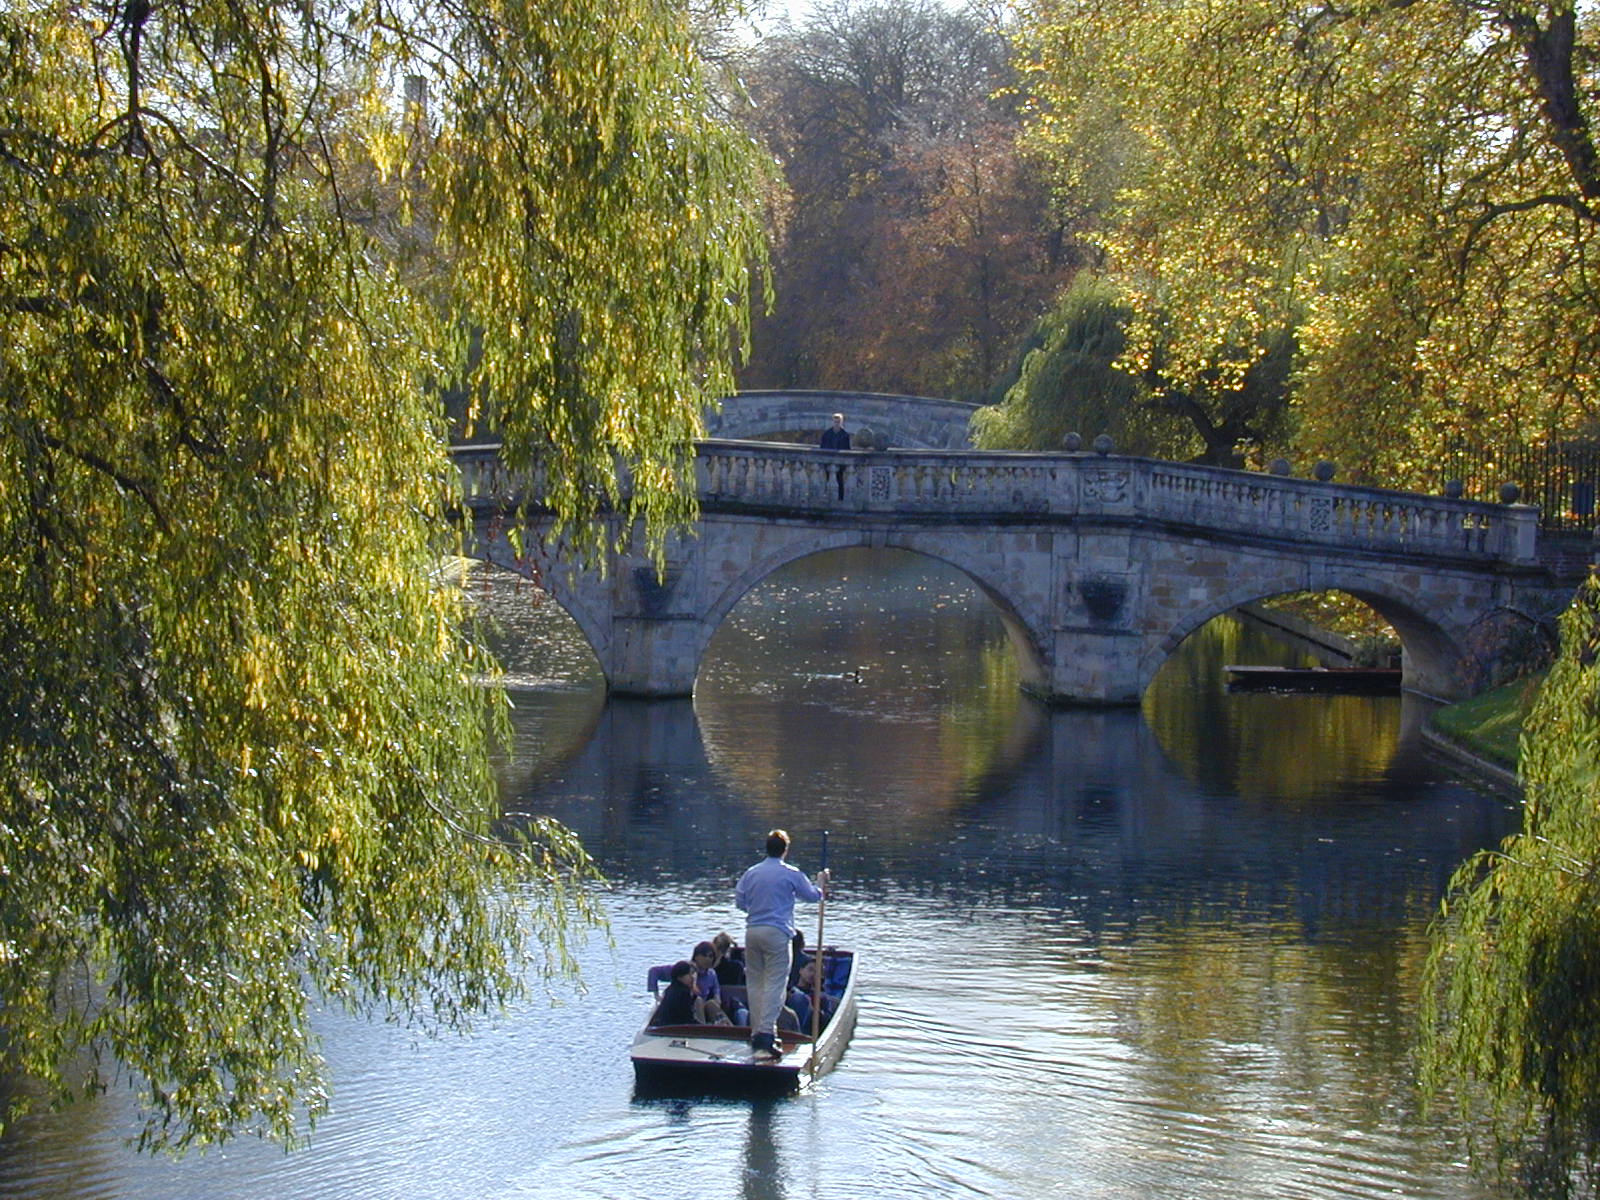 File:Punting on the River Cam.jpg - Wikimedia Commons